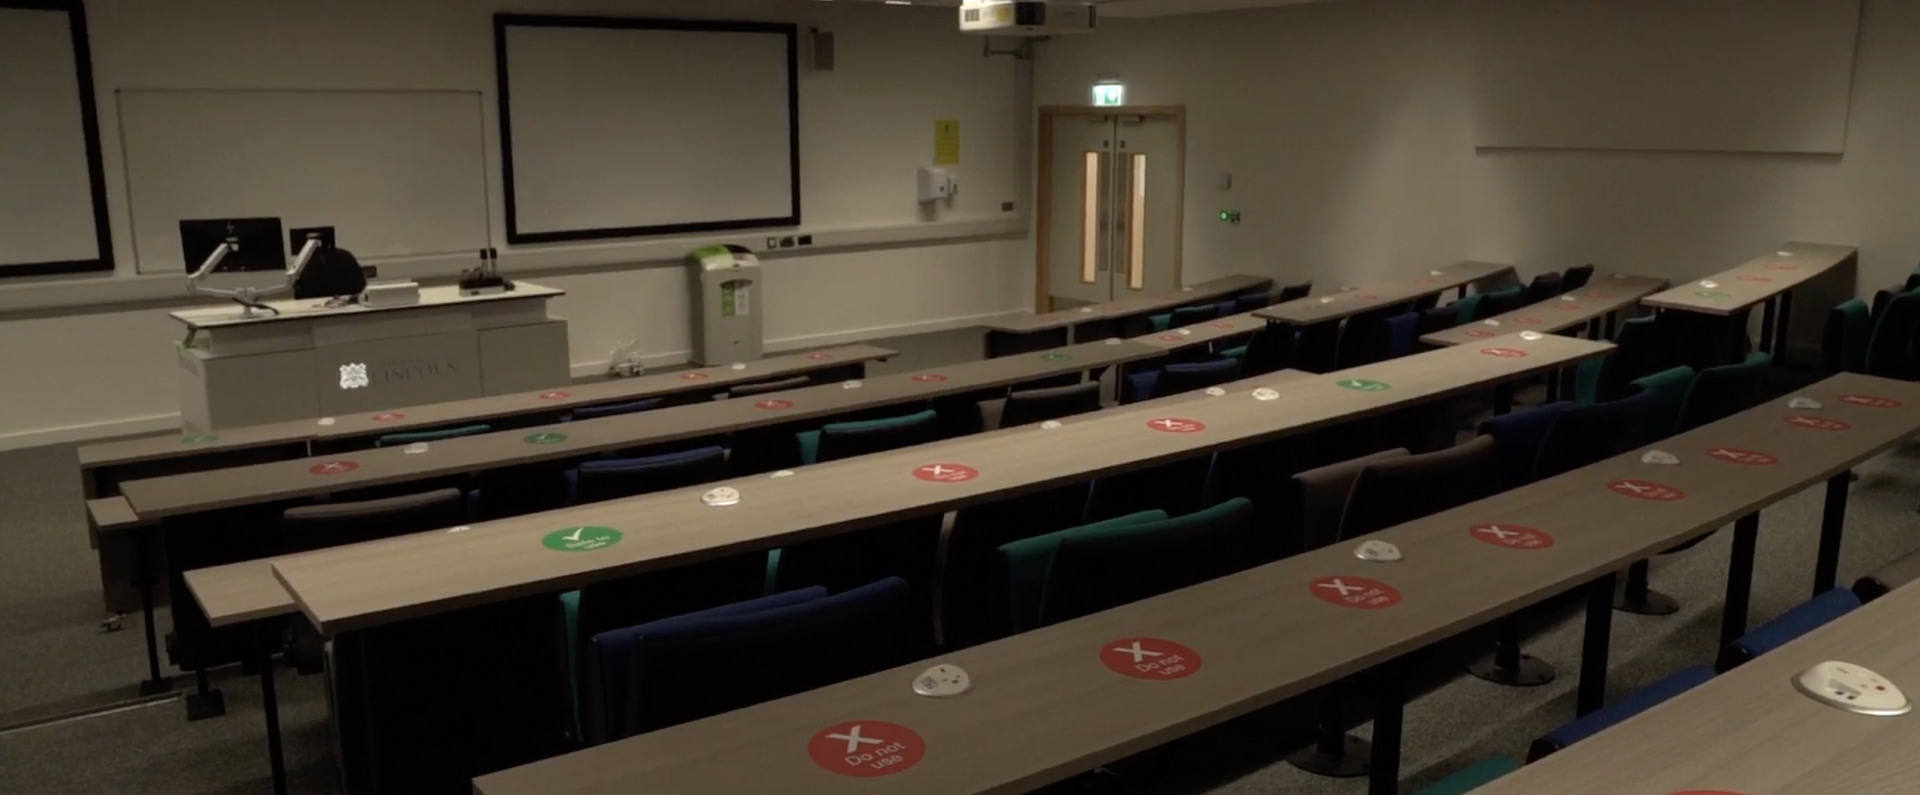 Medical building lecture hall. Shows rows of seating facing a blank projector screen. 